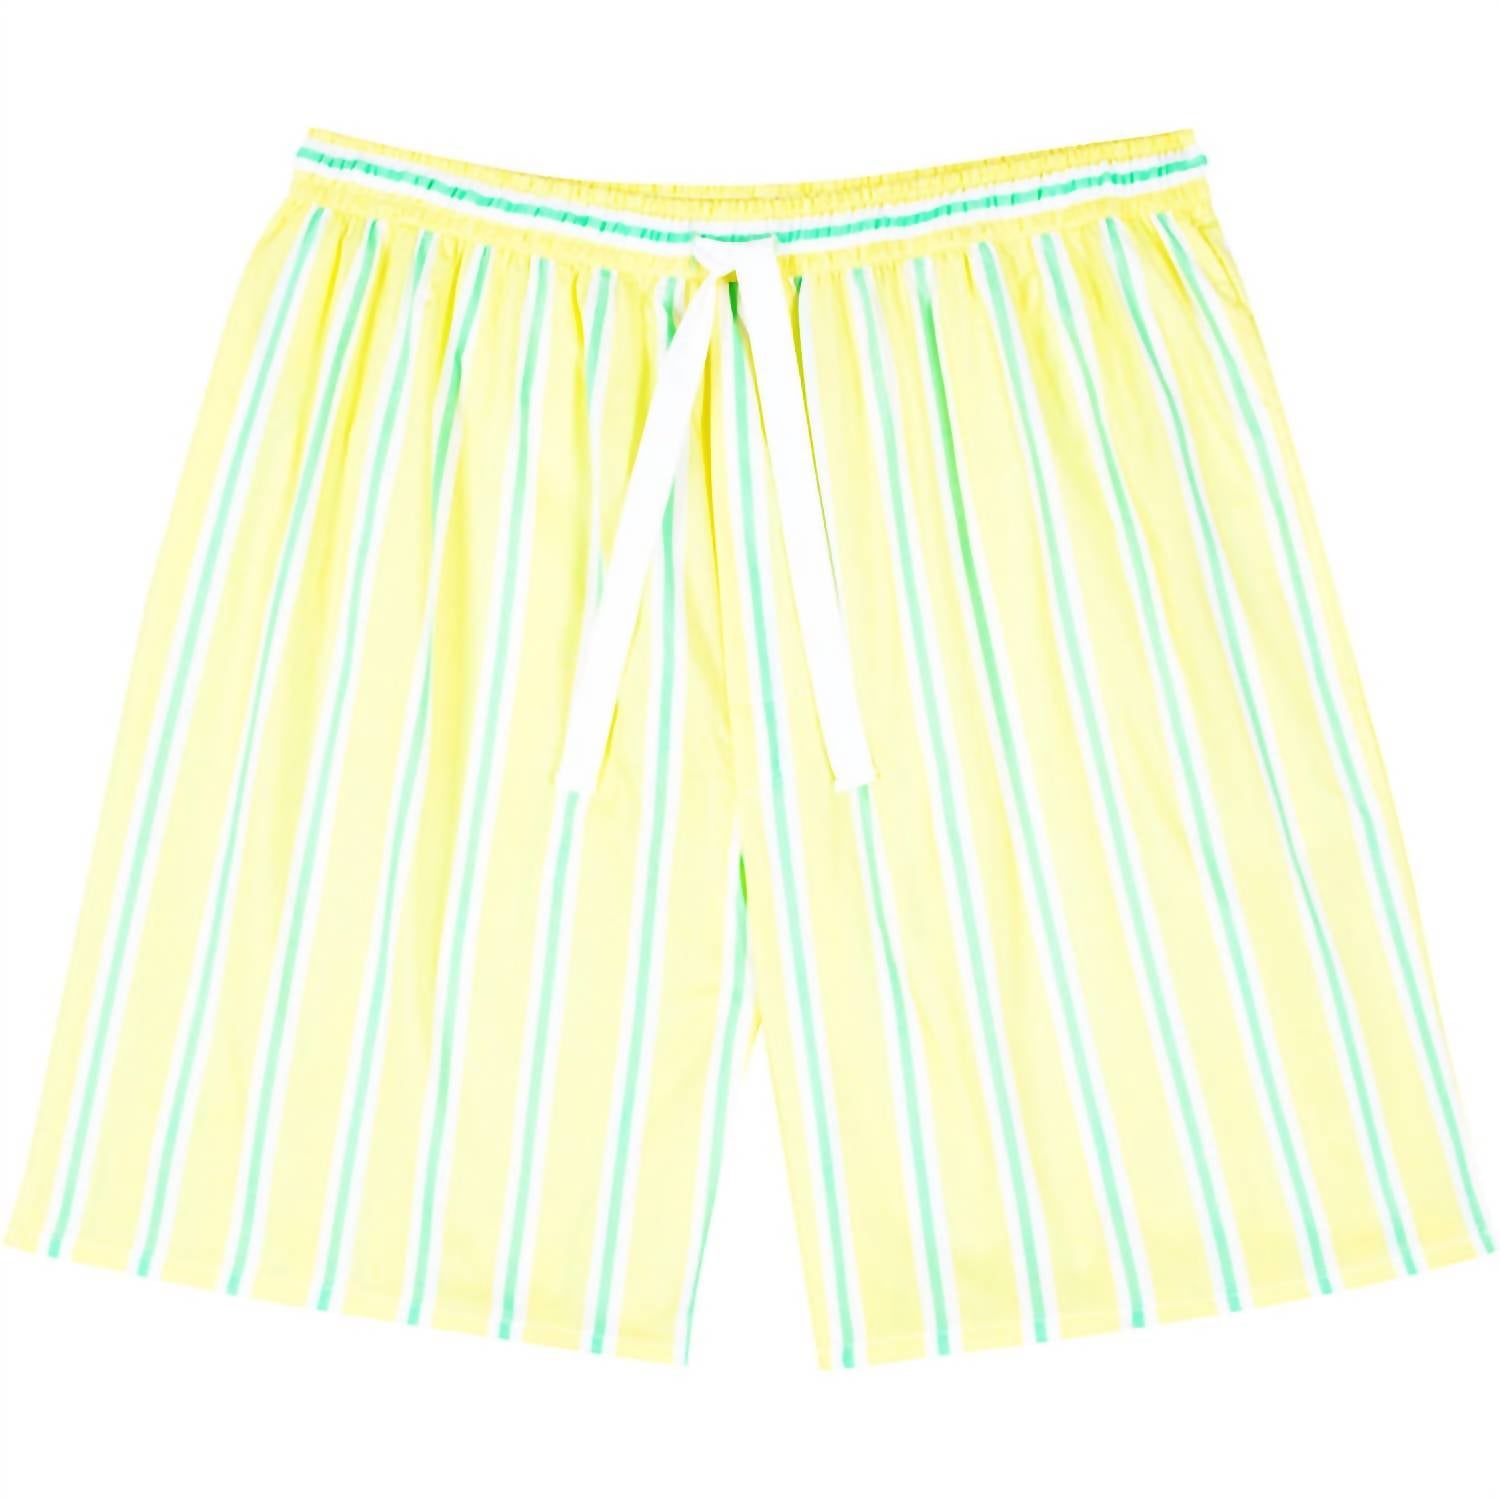 Sant And Abel - MEN'S ANDY COHEN SLEEP SHORTS